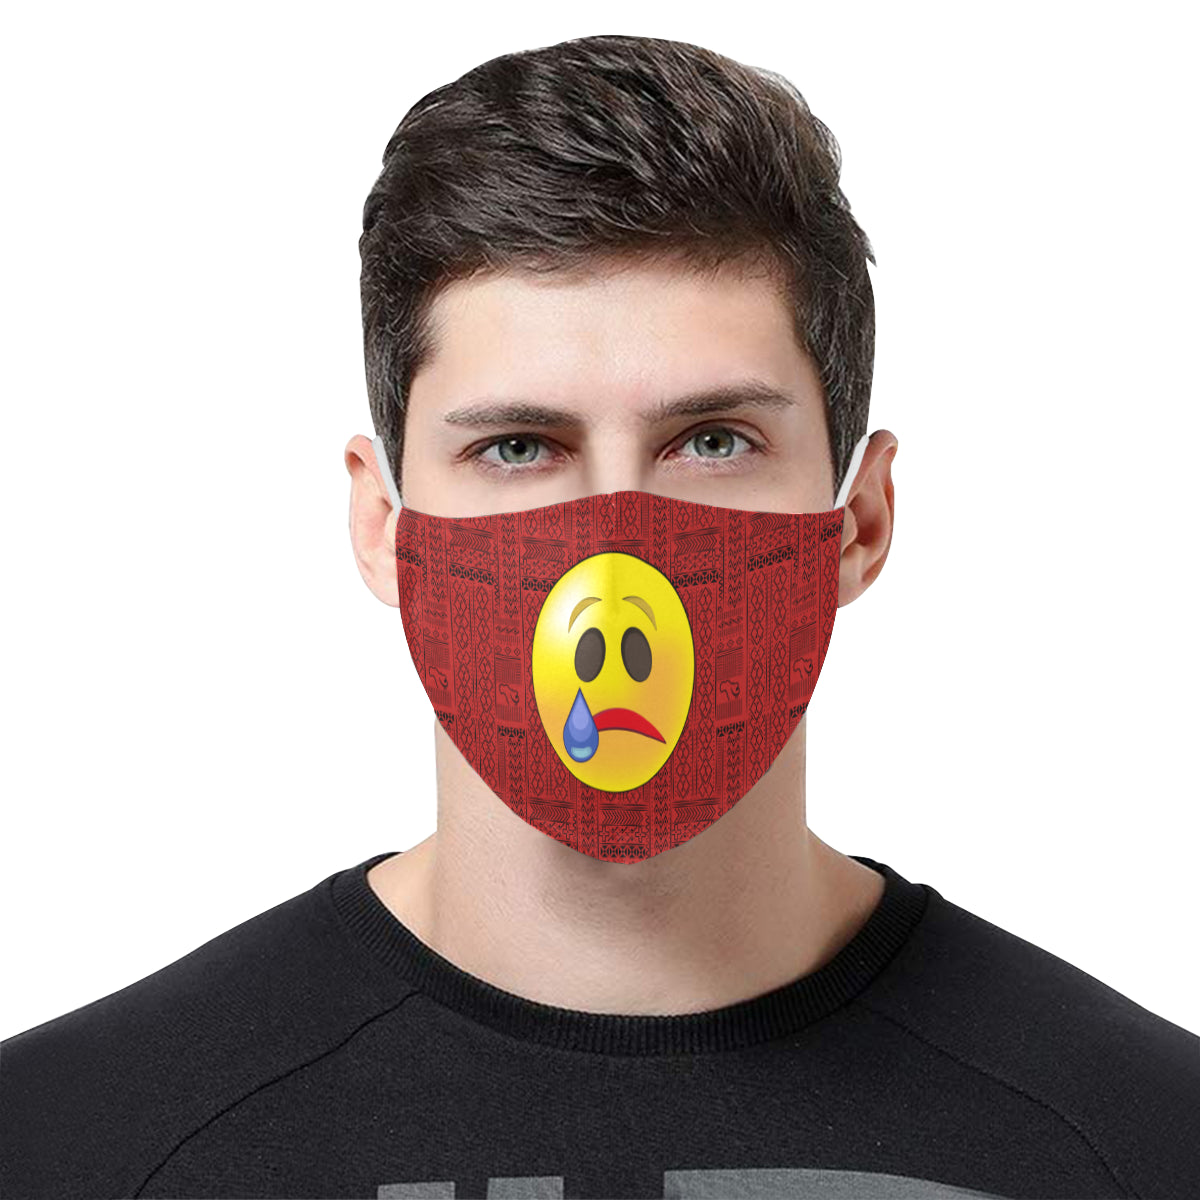 Crying Tribal Print Emoji Cotton Fabric Face Mask with Filter Slot and Adjustable Strap - Non-medical use (2 Filters Included)